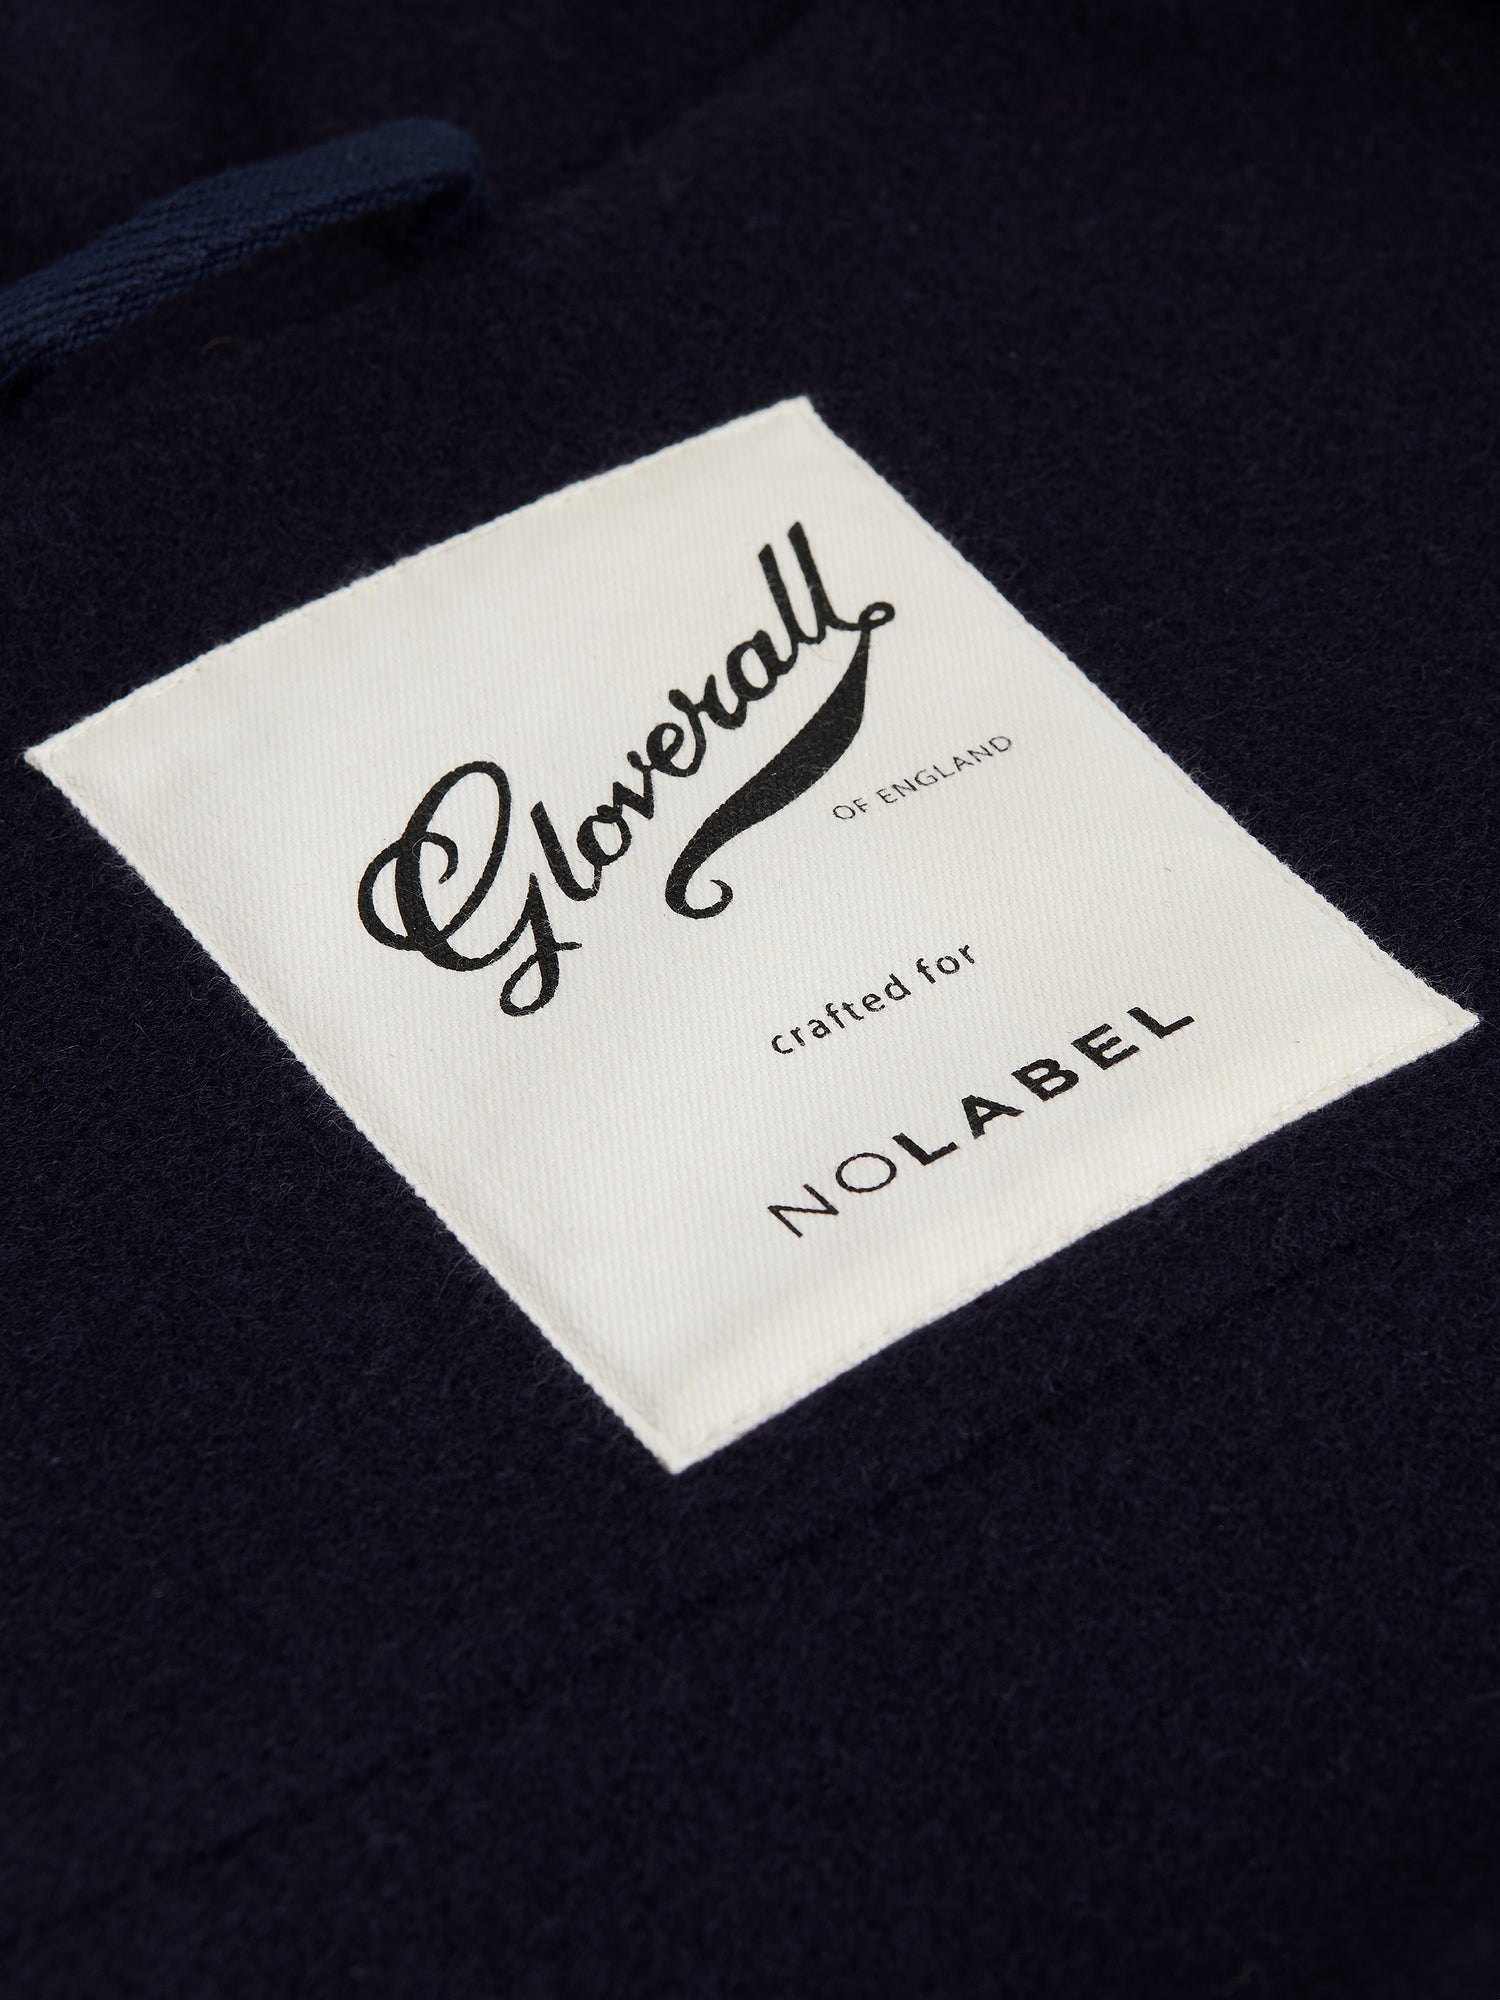 Gloverall x No Label Monty jaswol OW00042-NVY